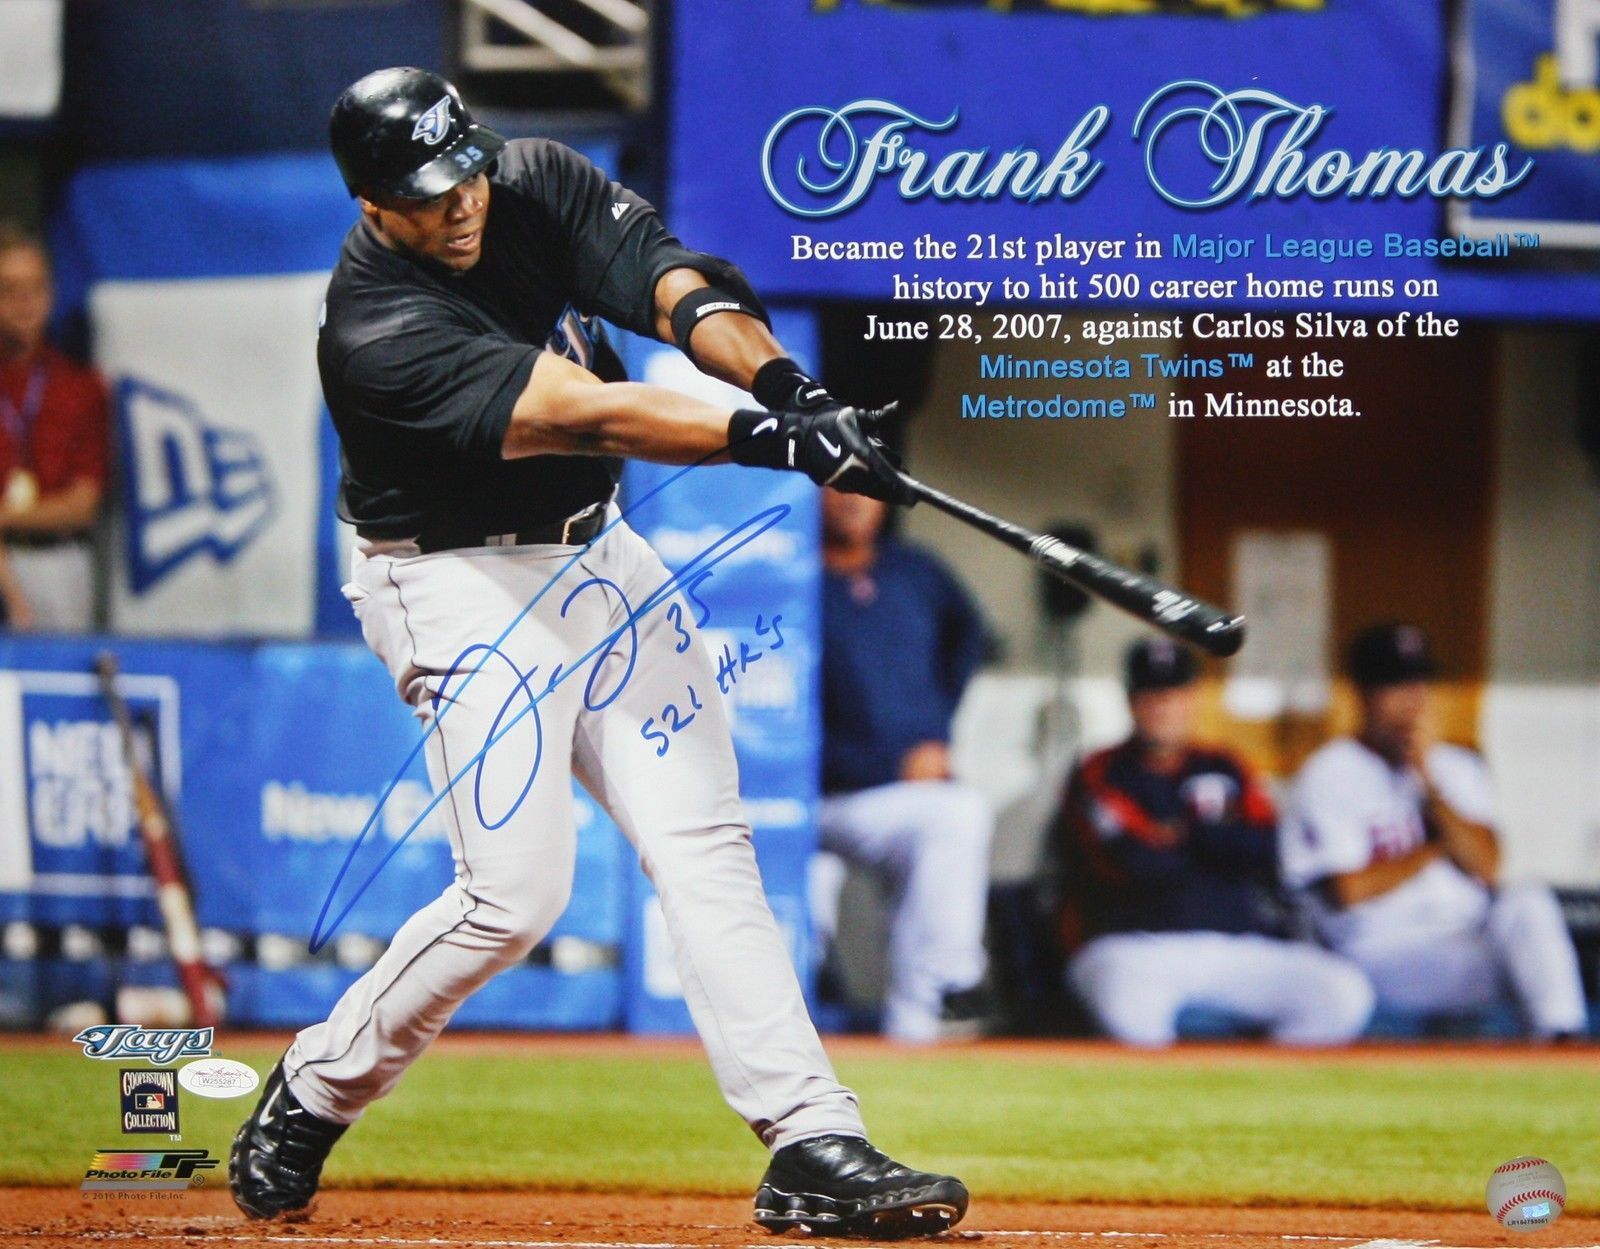 Frank Thomas Autographed 16x20 Named Swinging Photo Poster painting W/ 521 HR- JSA Authenticated